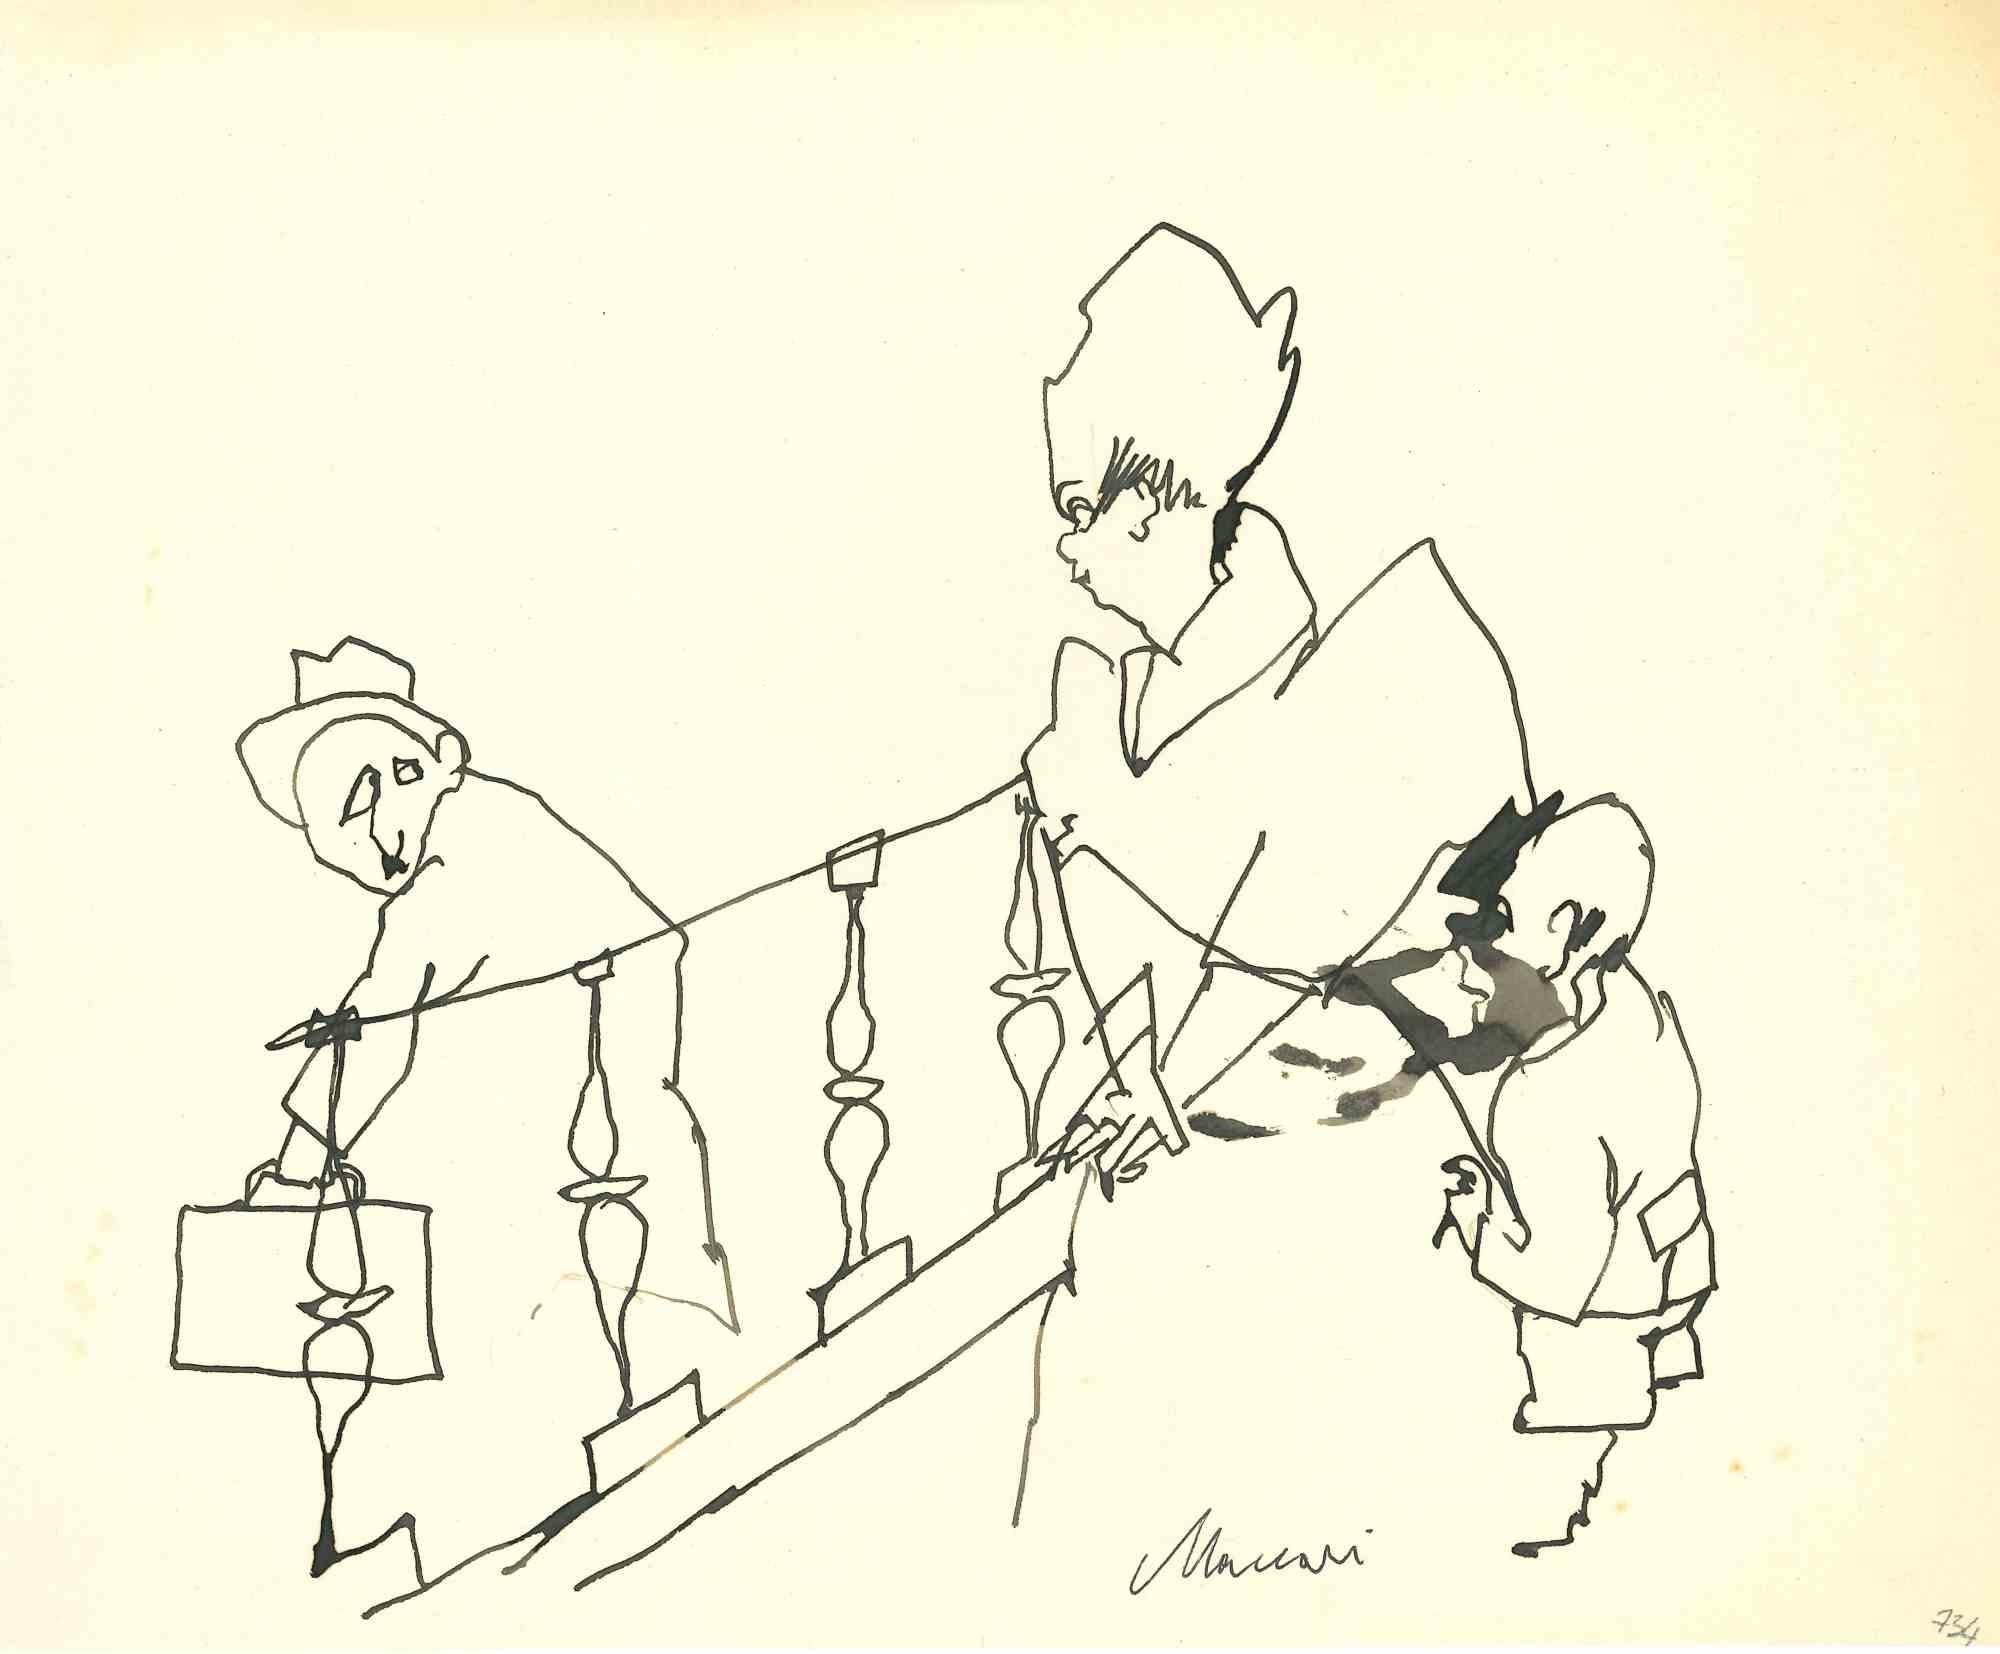 The Departure is a China ink Drawing realized by Mino Maccari  (1924-1989) in the 1960s.

Hand-signed on the lower.

Good conditions.

Mino Maccari (Siena, 1924-Rome, June 16, 1989) was an Italian writer, painter, engraver and journalist, winner of